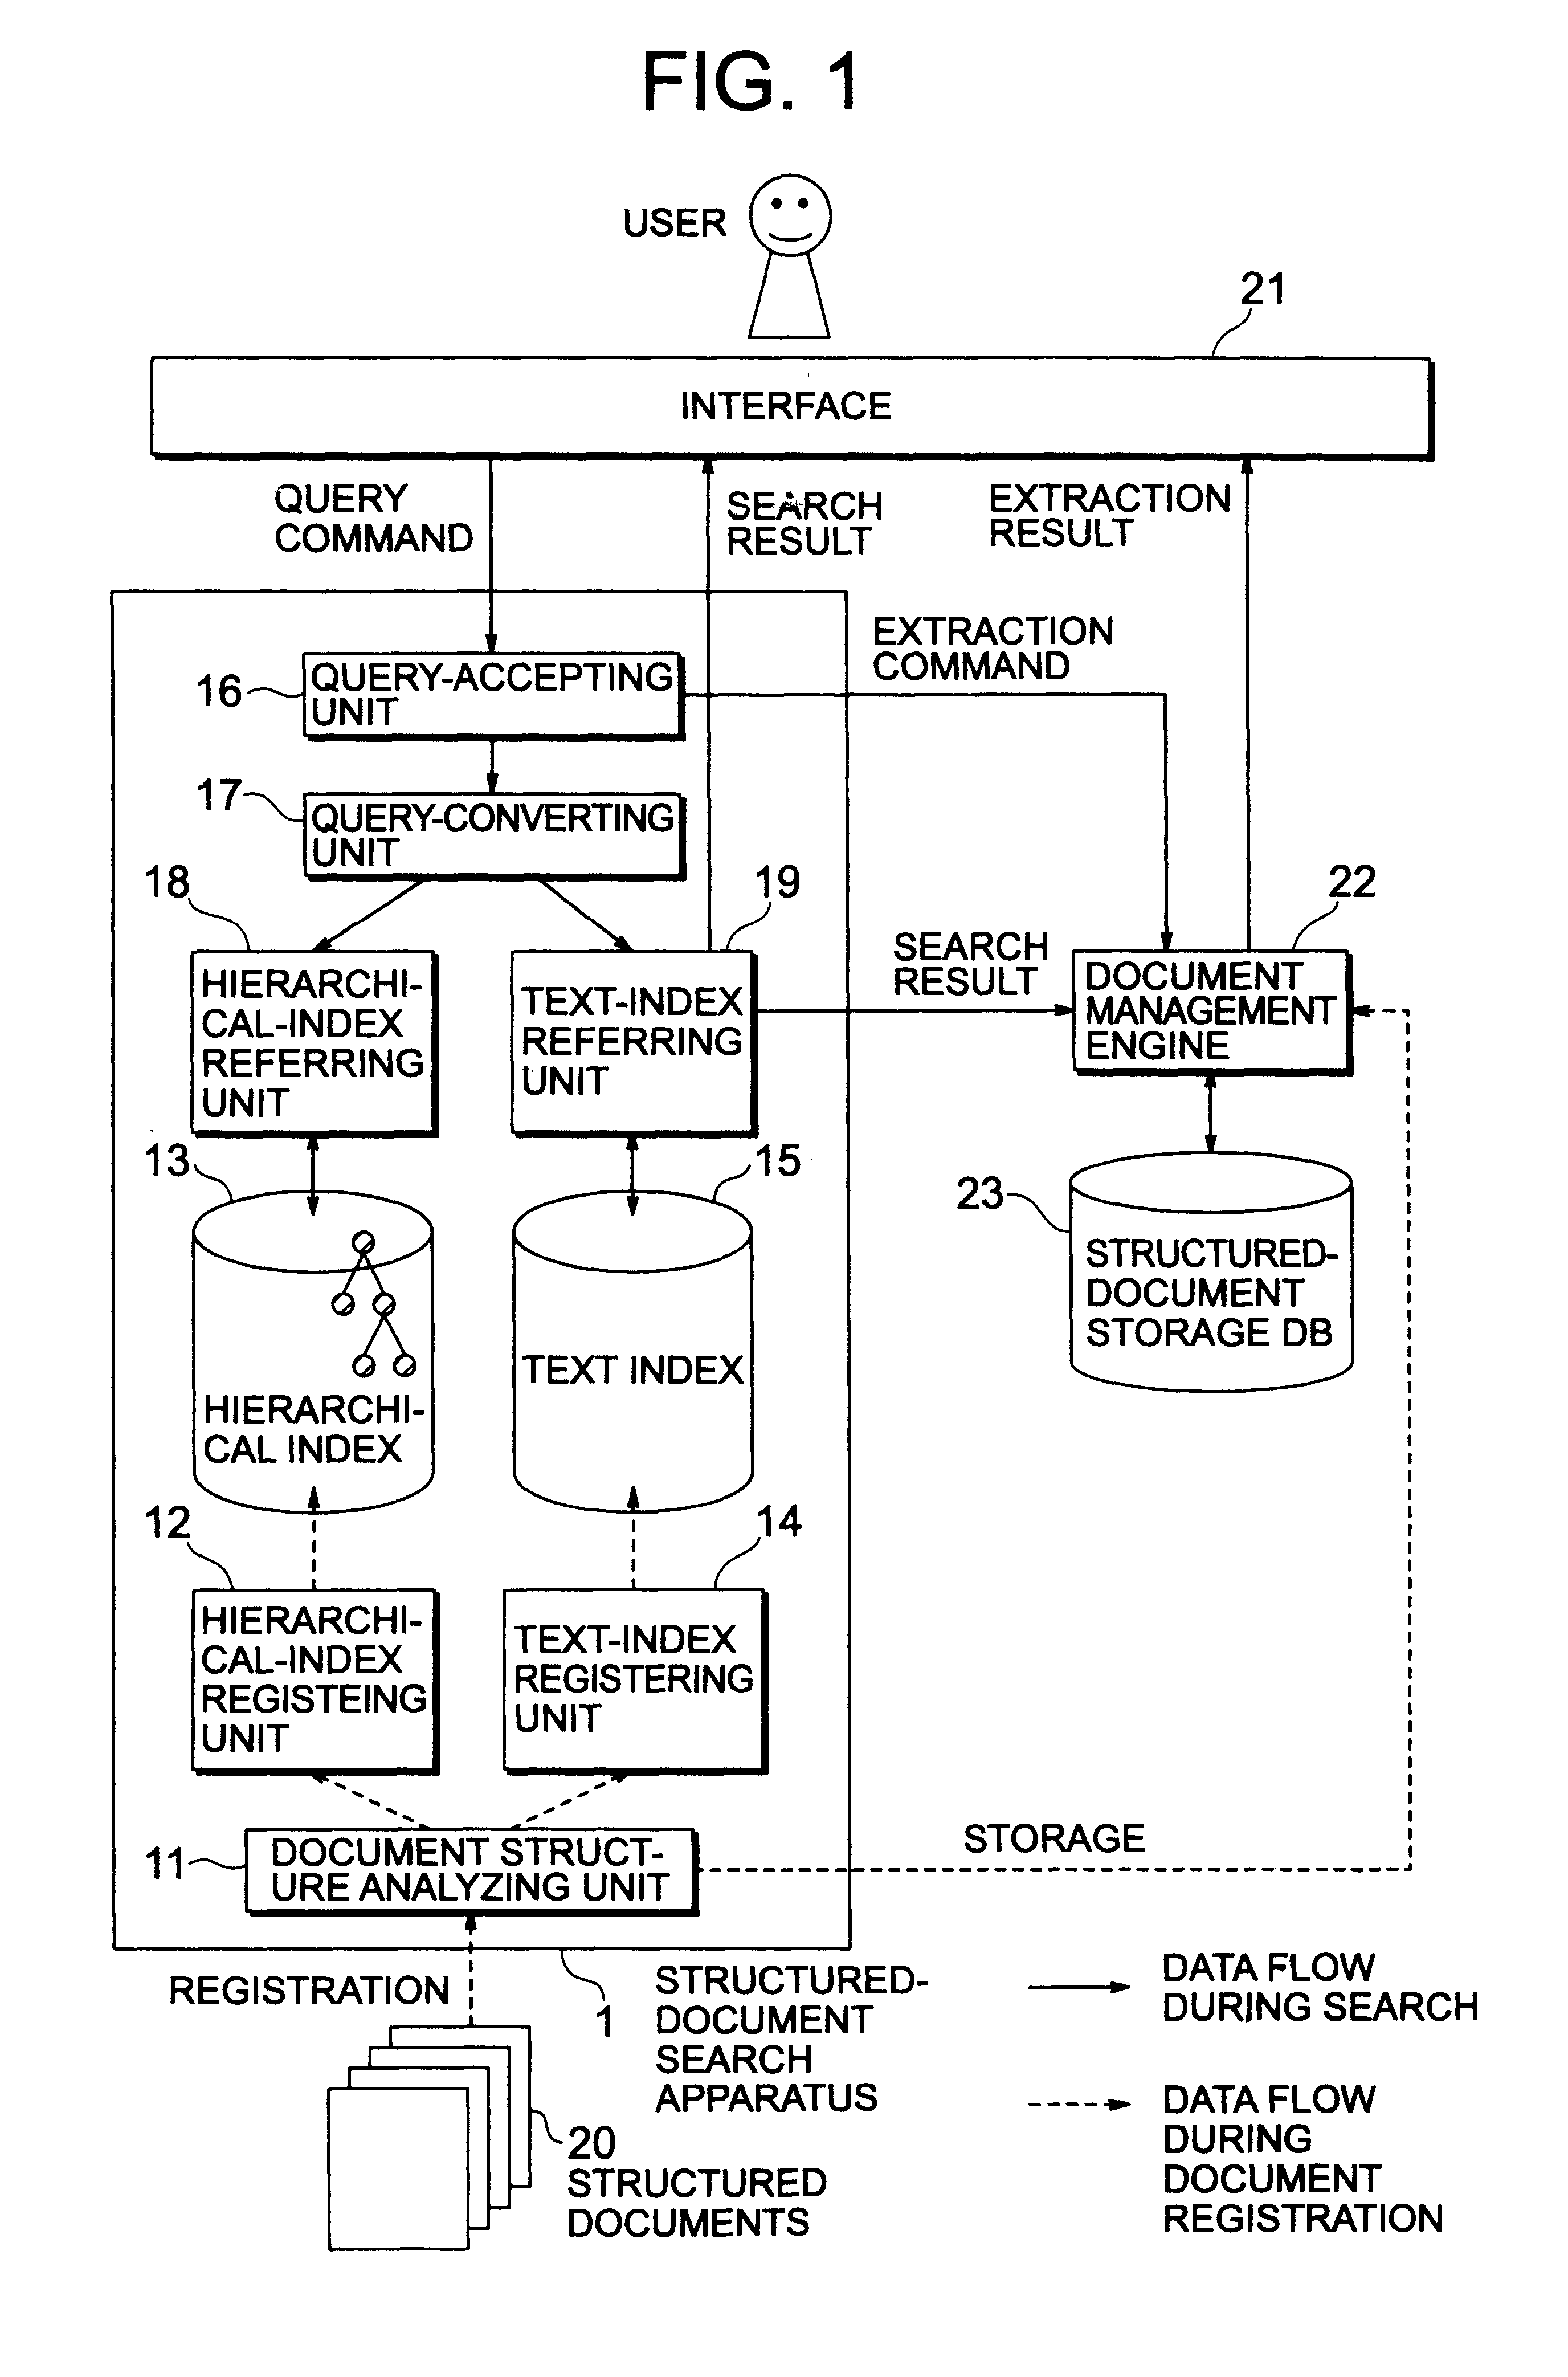 Structured-document search apparatus and method, recording medium storing structured-document searching program, and method of creating indexes for searching structured documents